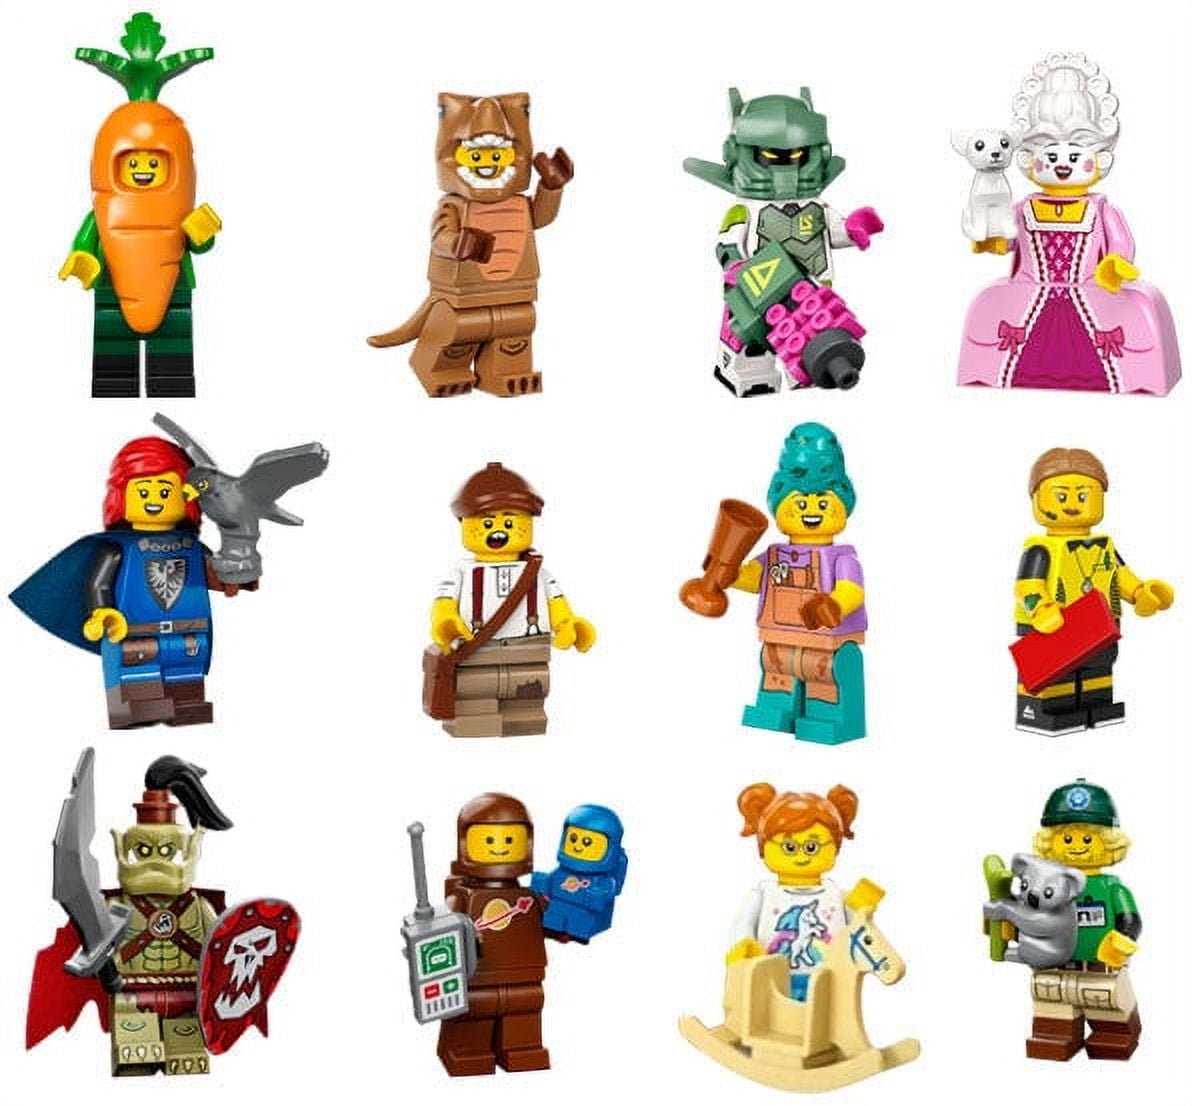 LEGO Series 24 Collectible Minifigures Complete Set of 12 - 71037 (SEALED)  